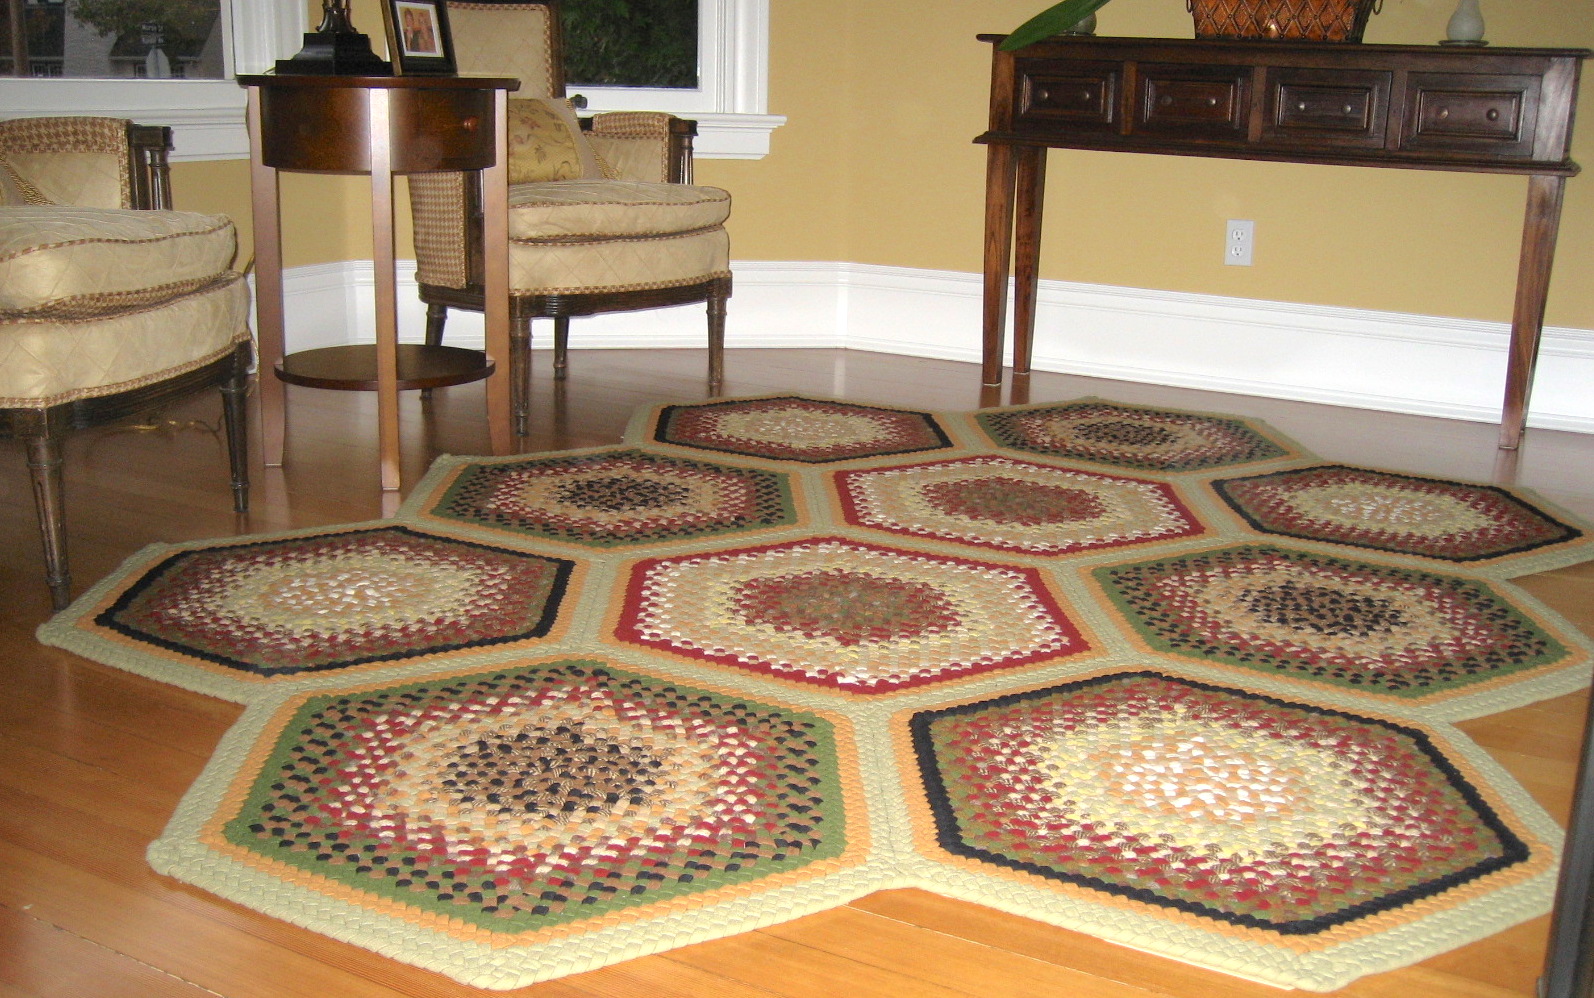 Country Braid House - Authentic Wool Braided Rugs